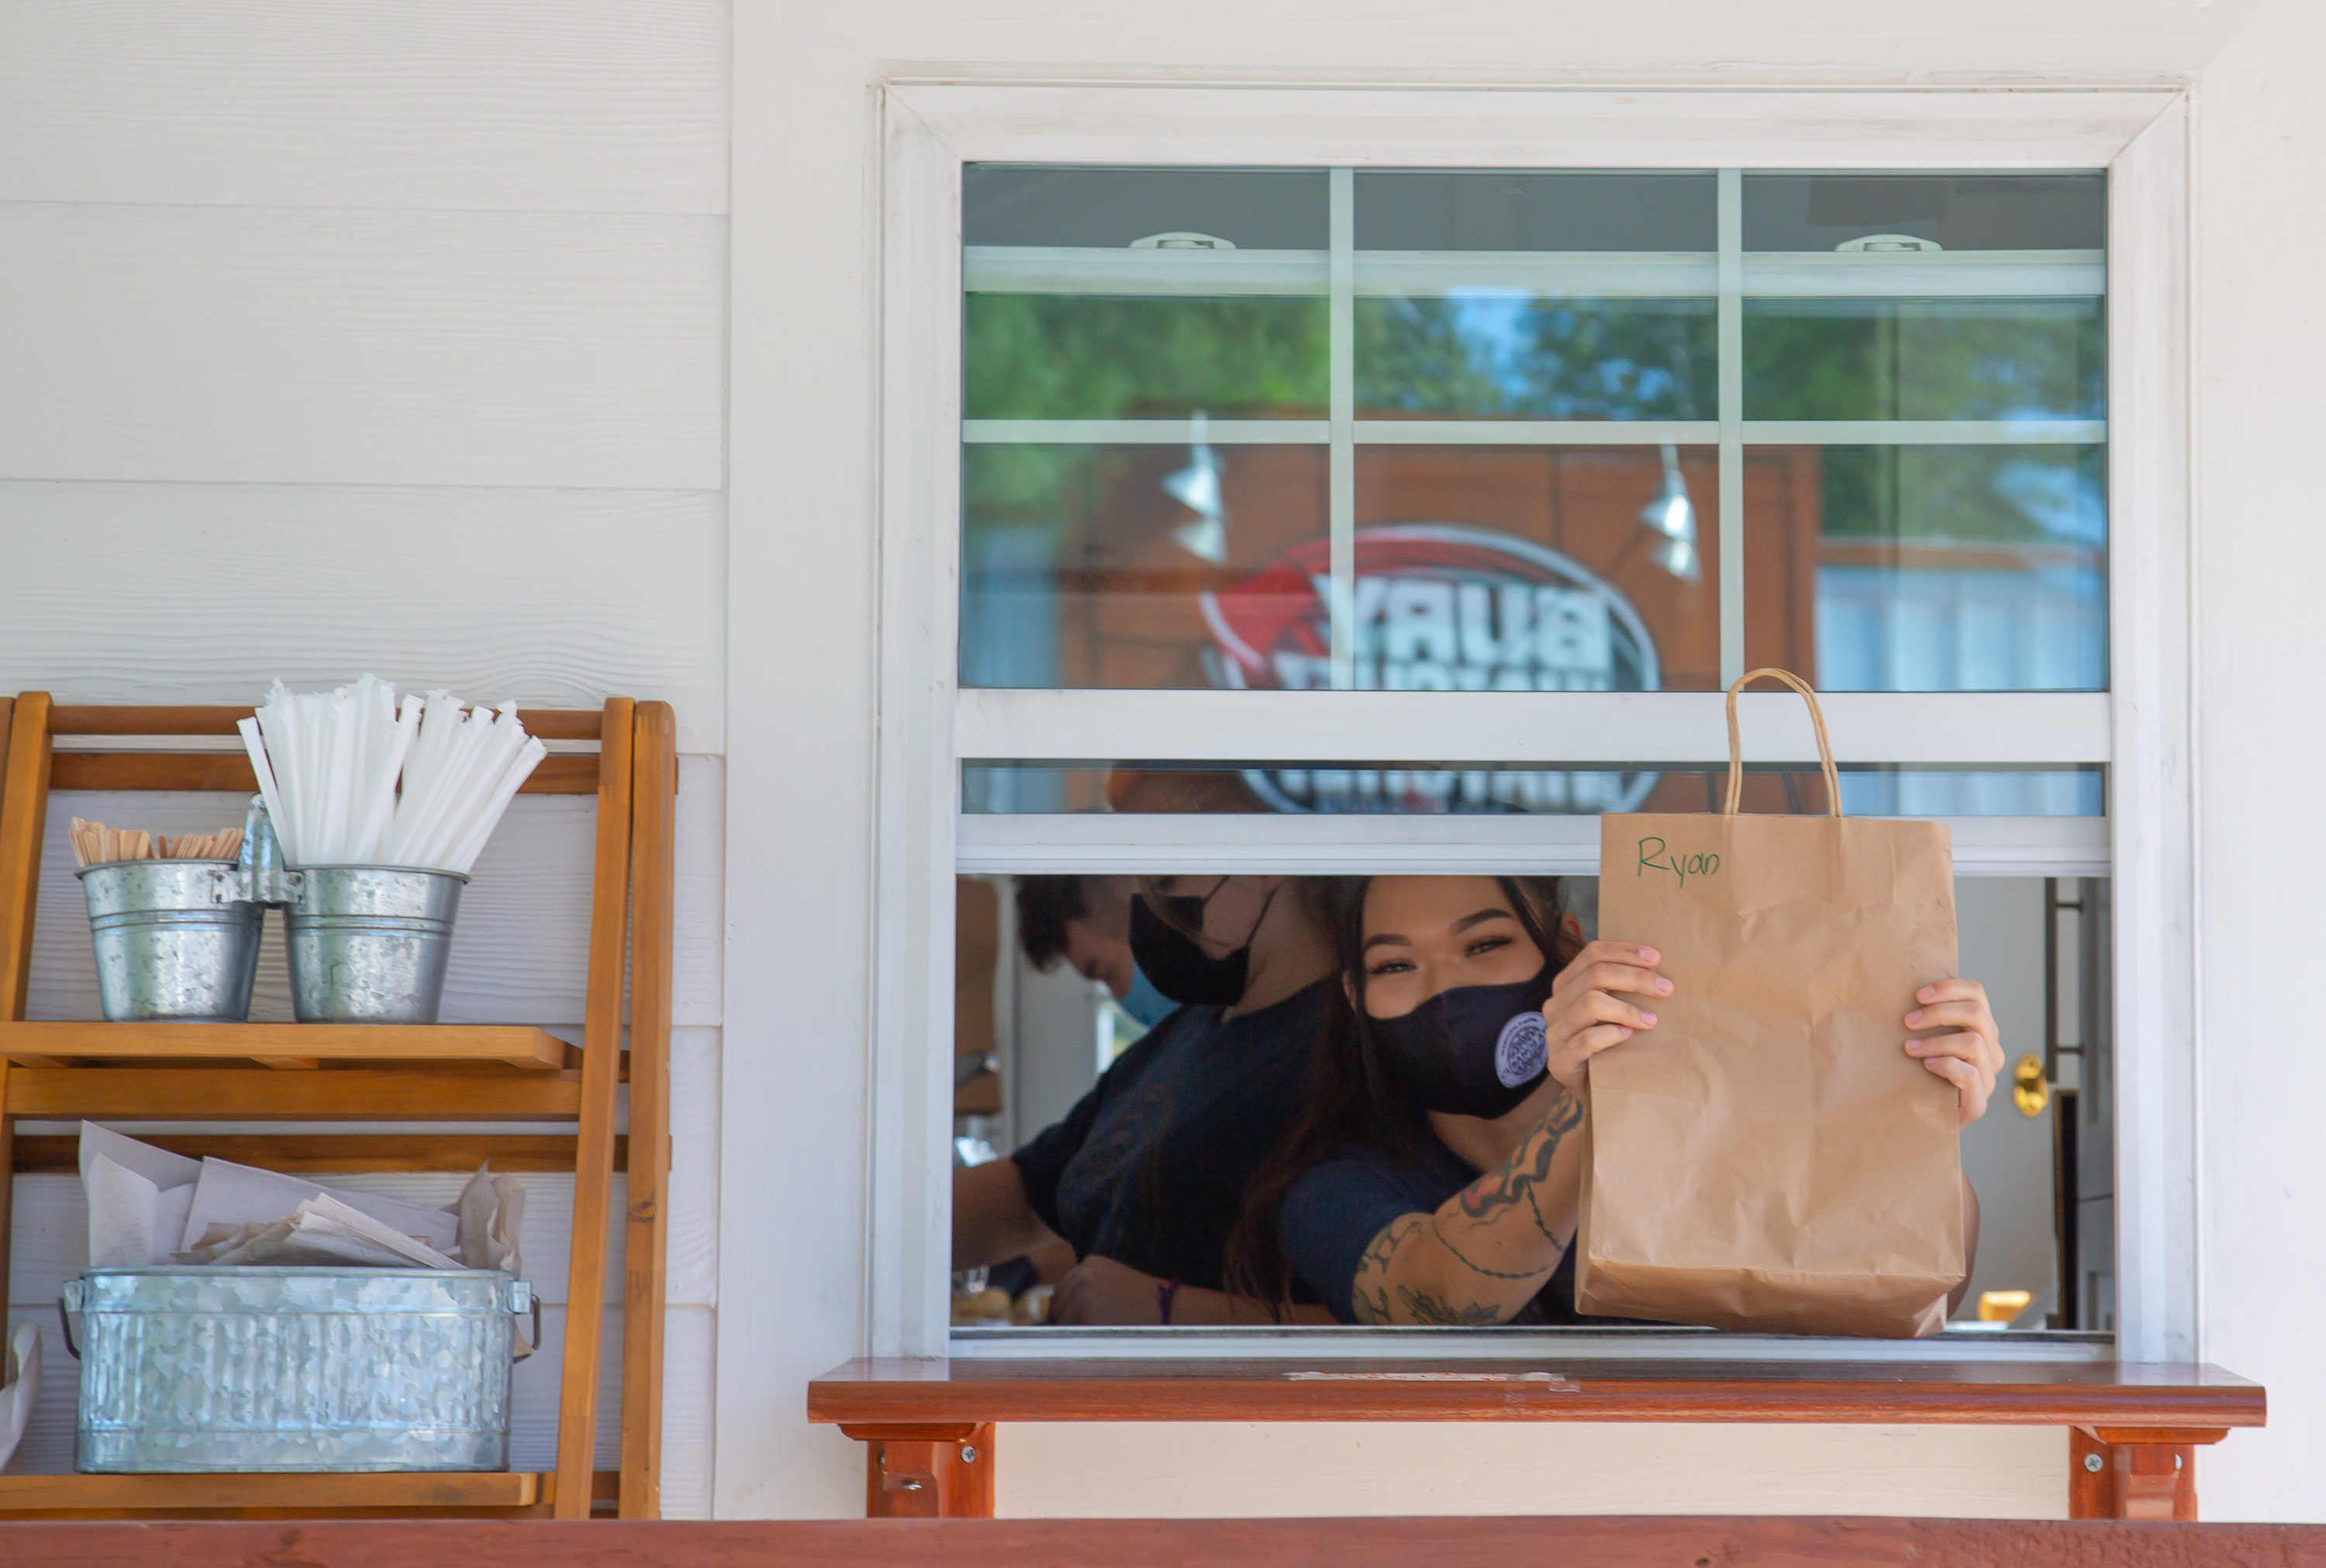 A woman of Asian descent in a black mask and tee shirt with tattooed arms handing a brown takeout bag through an open window. A wooden stand next to the window contains tins of straws, wooden coffee stirrers, and napkins